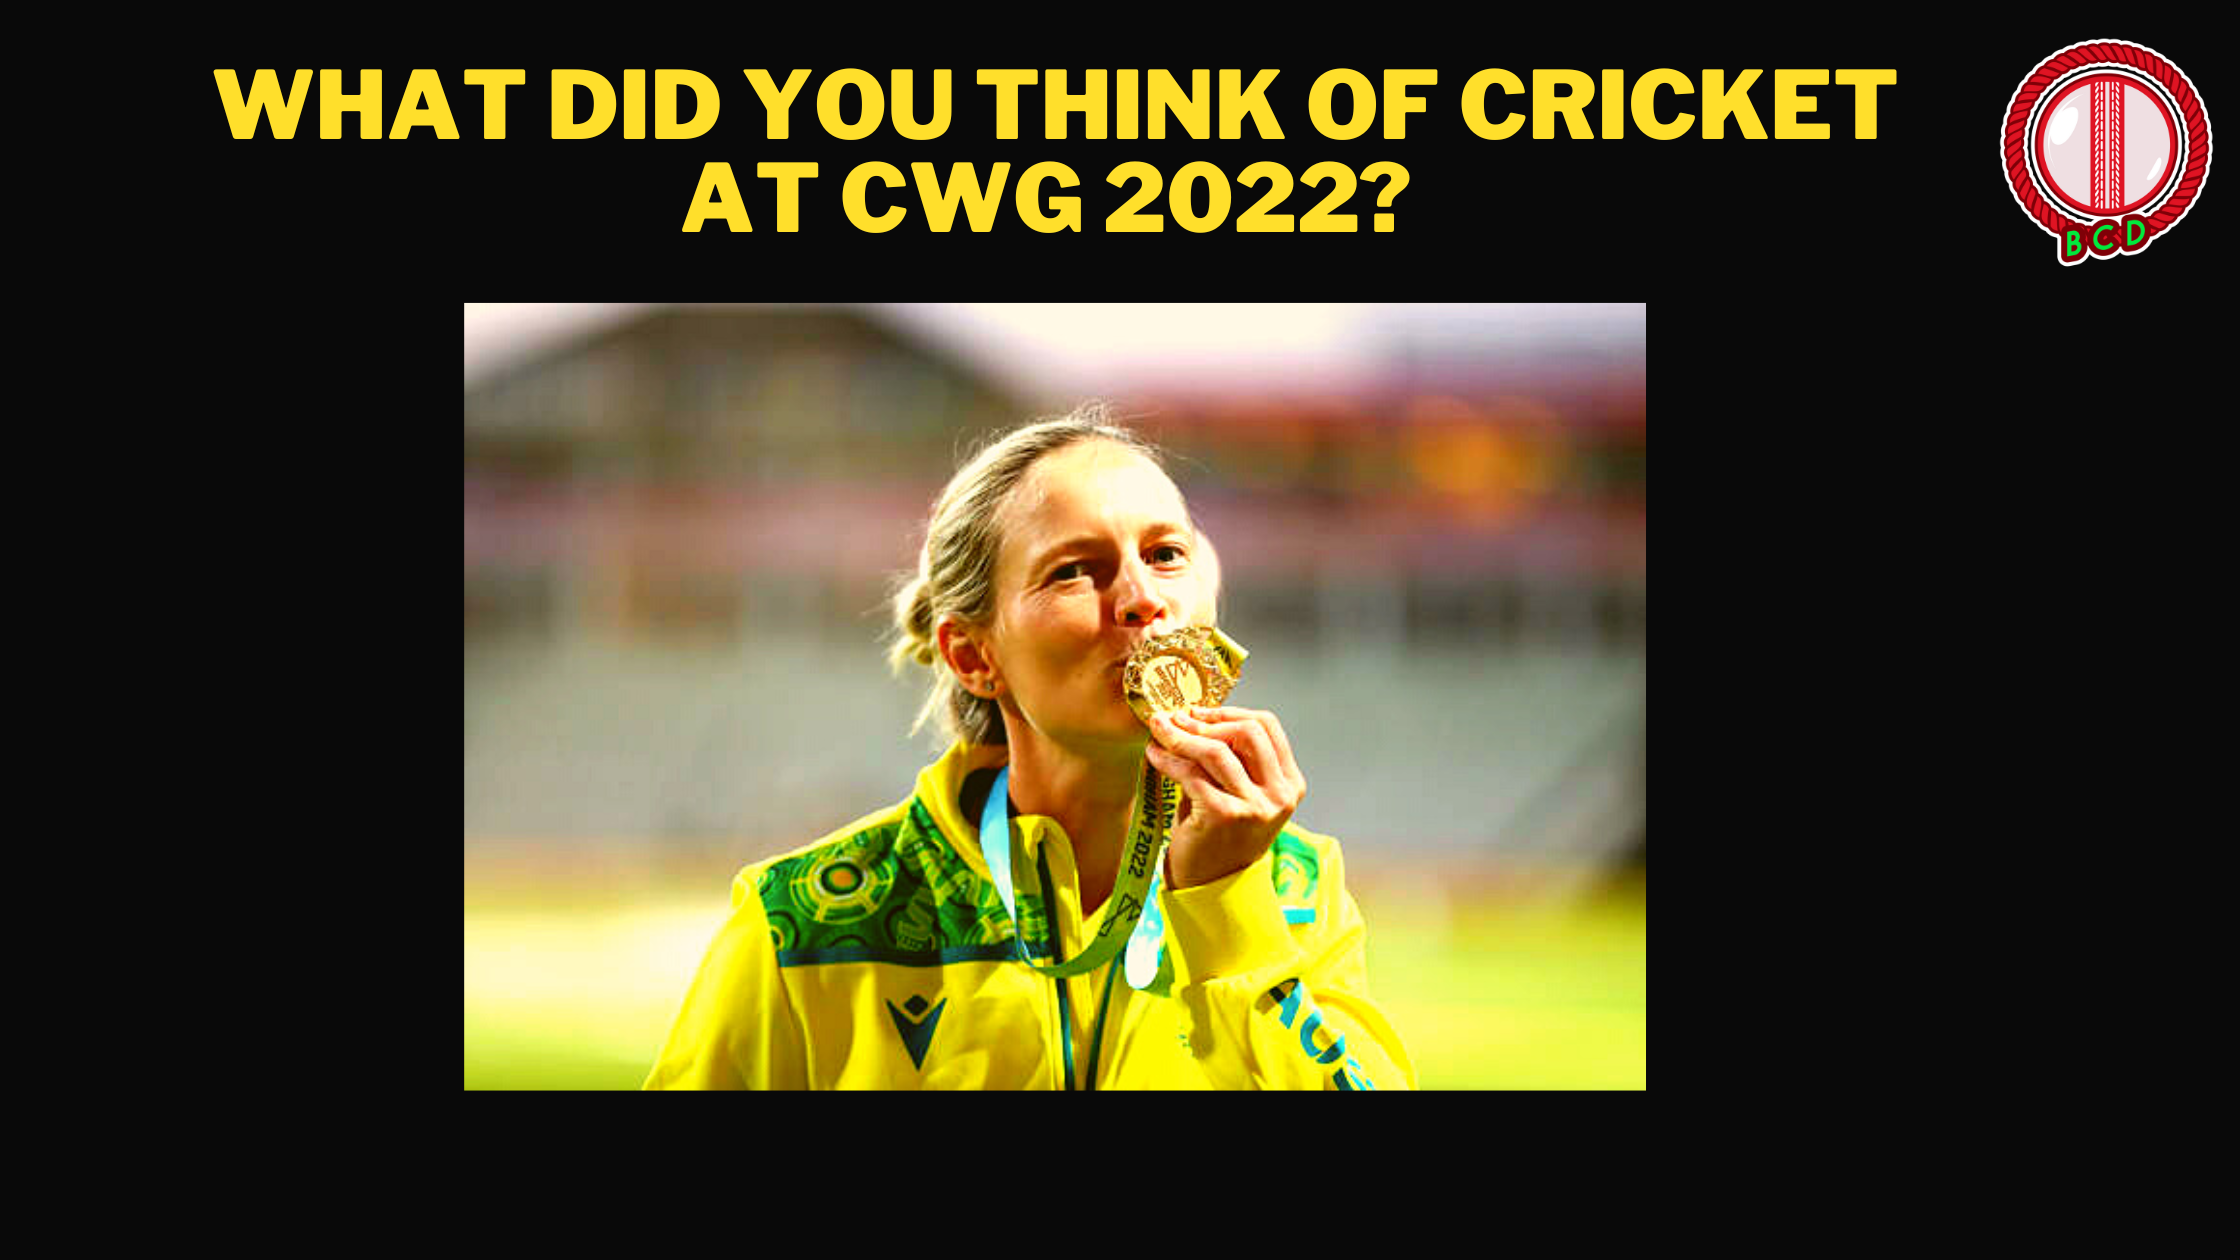 5 Things We Learned from Cricket in CWG 2022